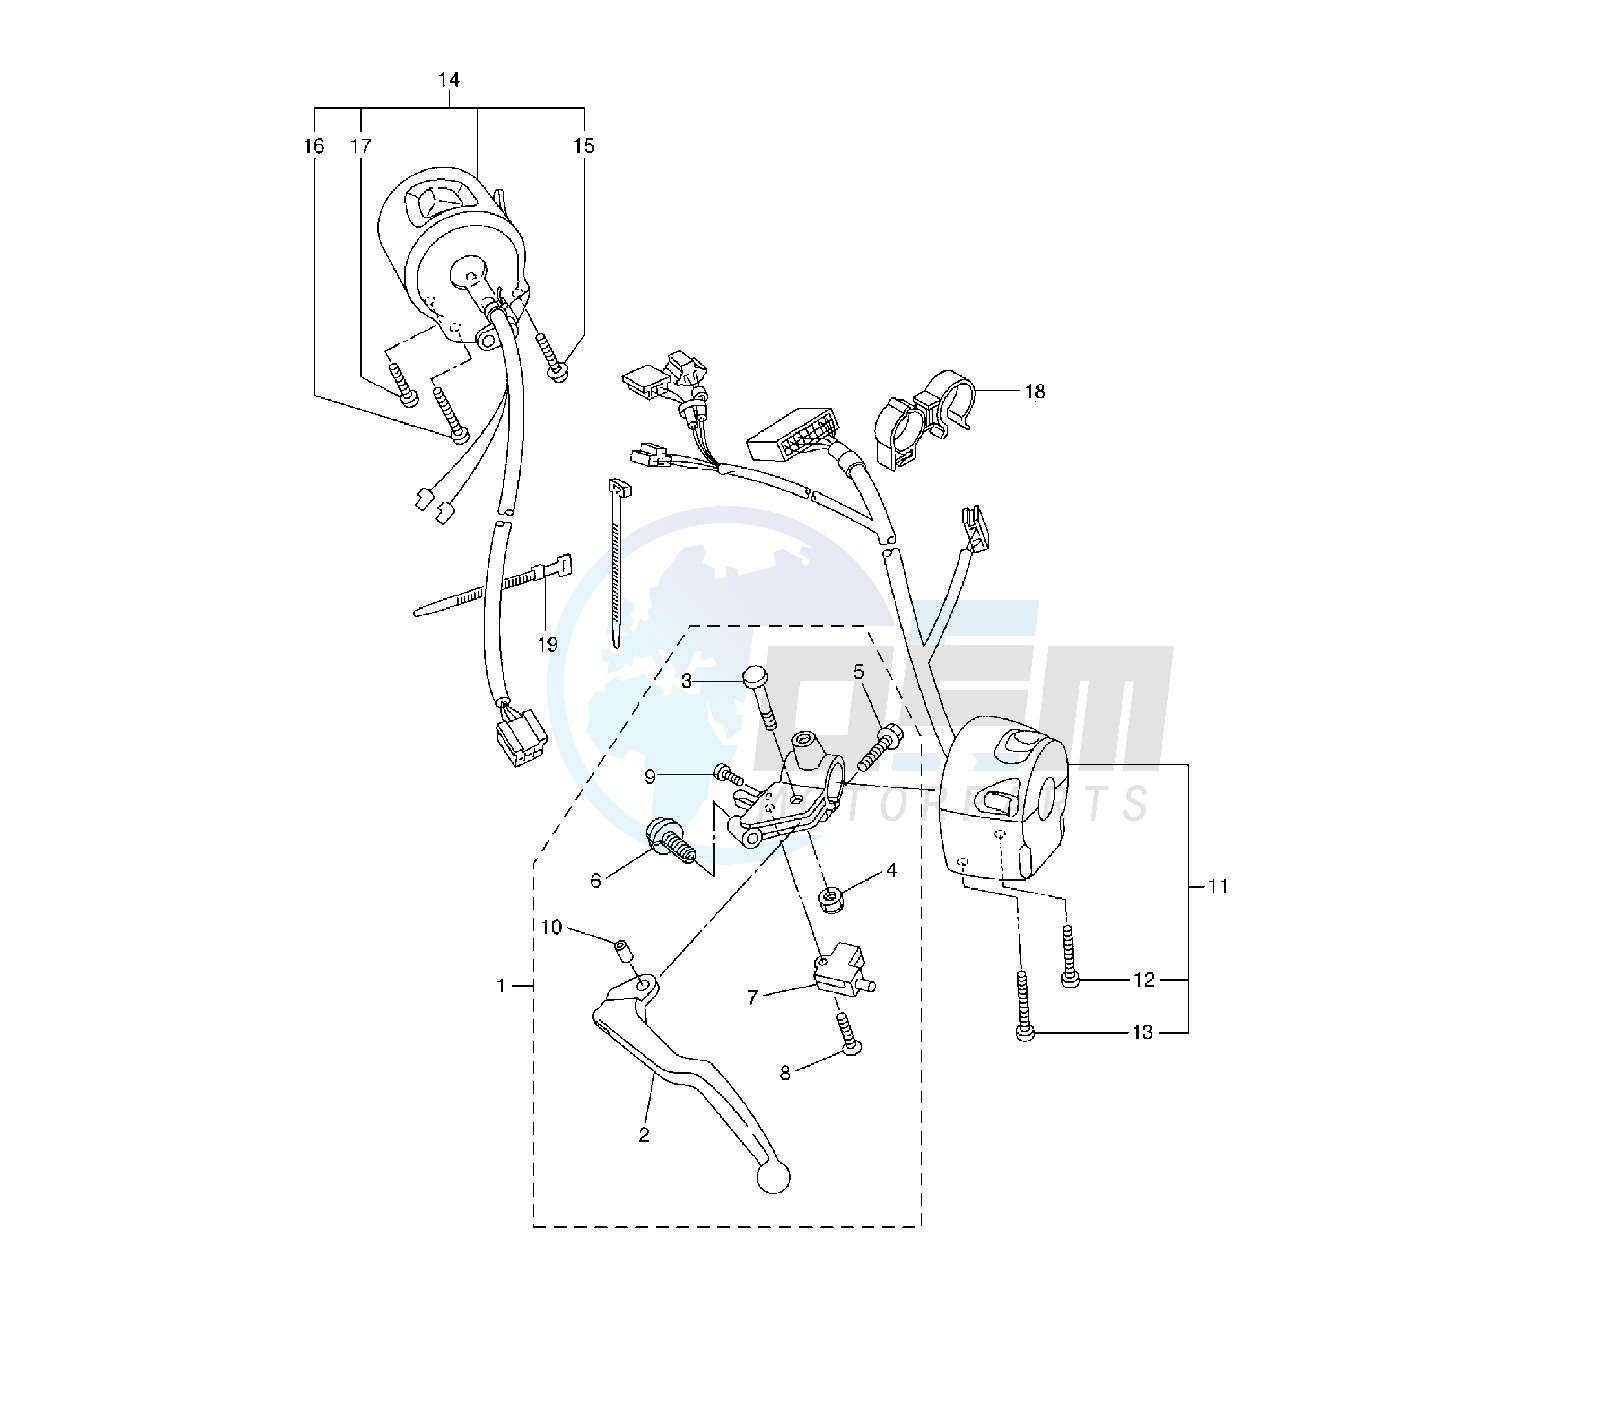 HANDLE SWITCH AND LEVER blueprint